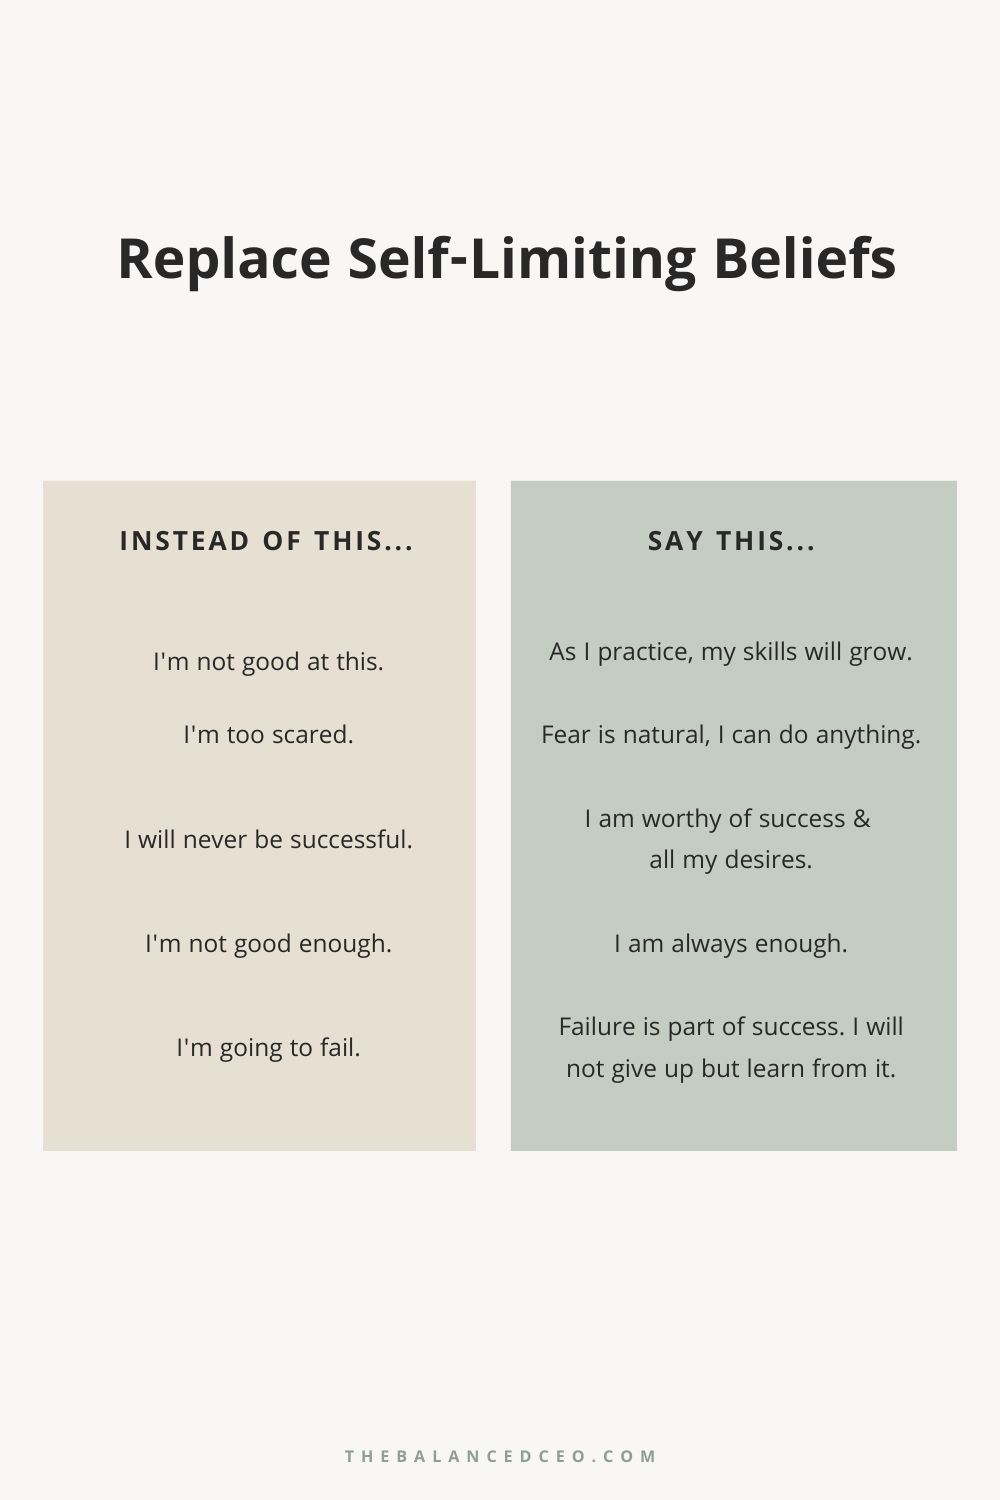 Replace Self-Limiting Beliefs